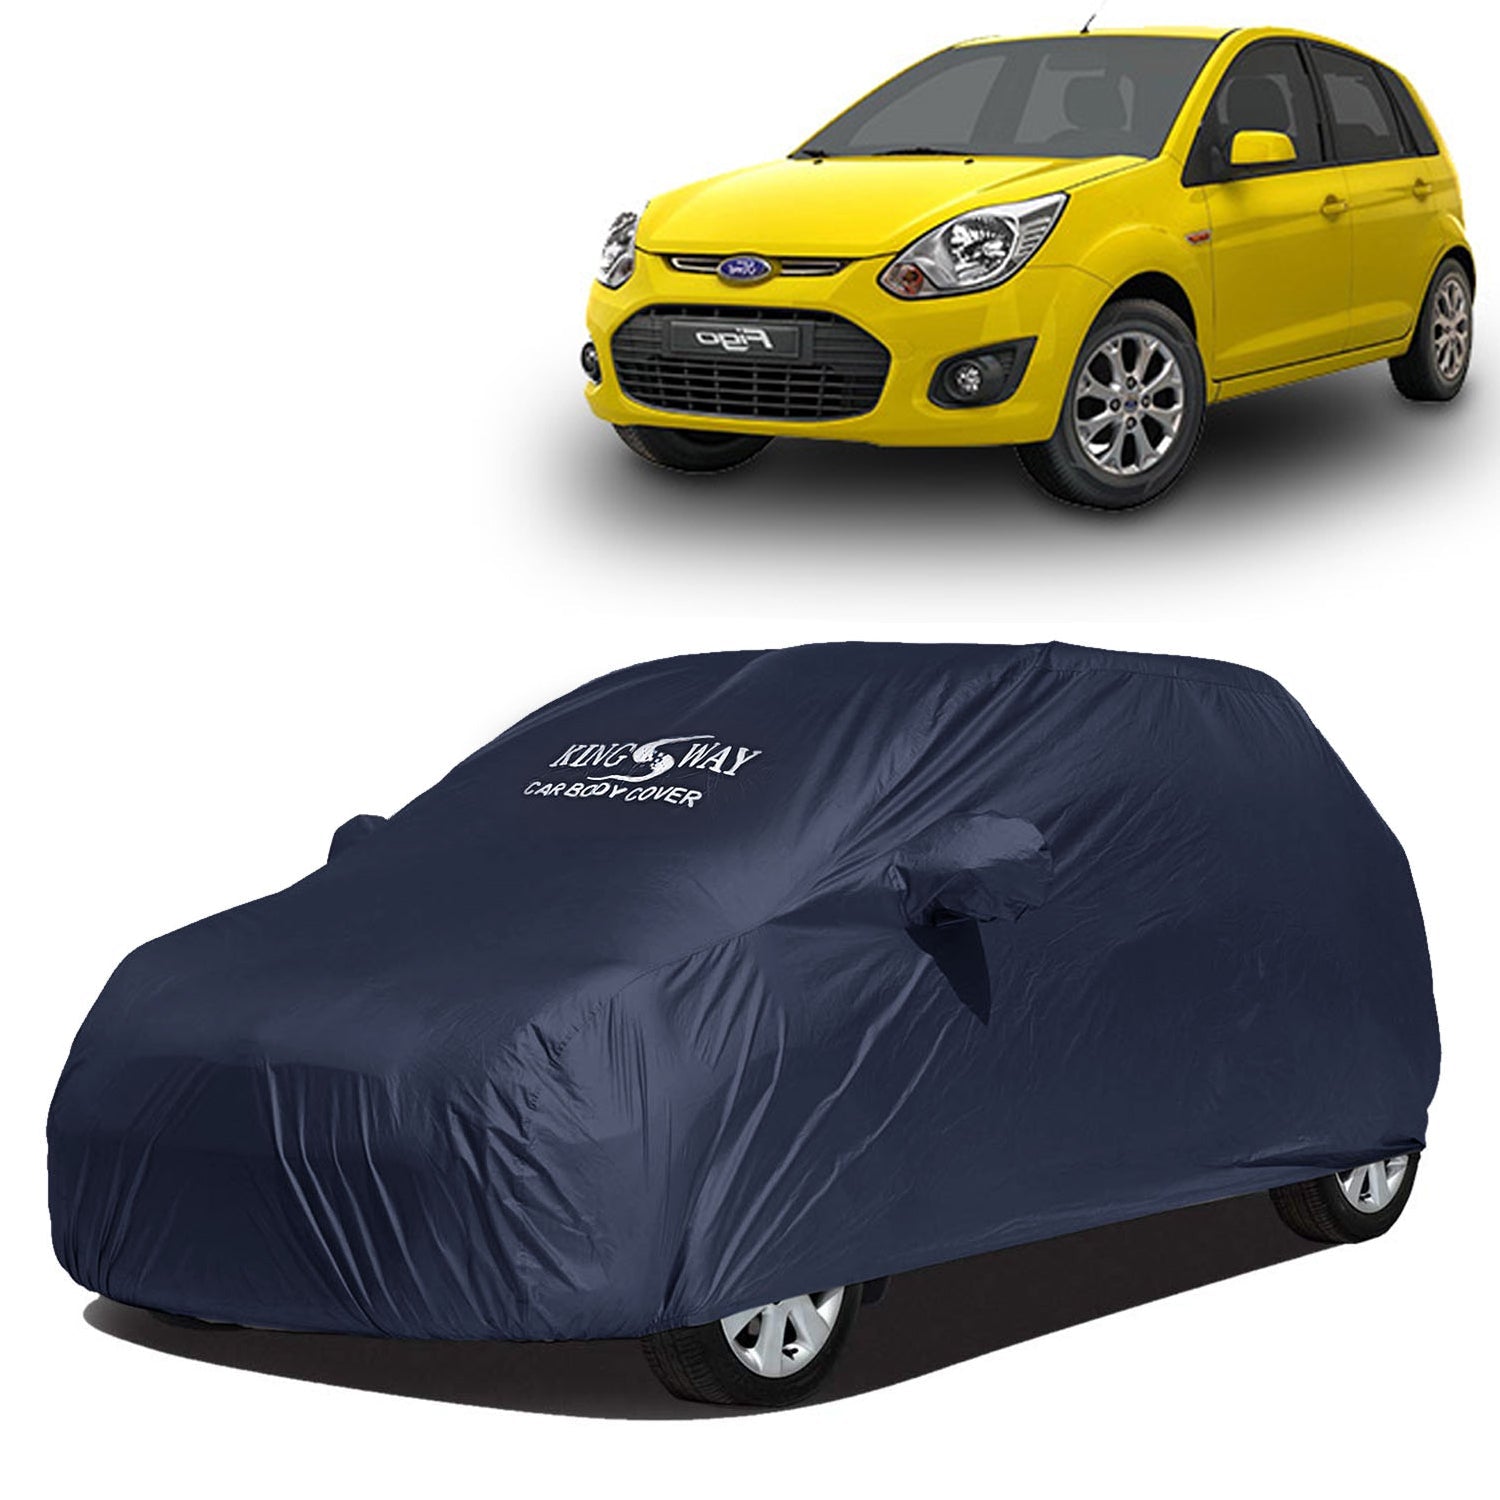 Bvm Moto Vehicle Body Covers - Buy Bvm Moto Vehicle Body Covers Online at  Best Prices In India